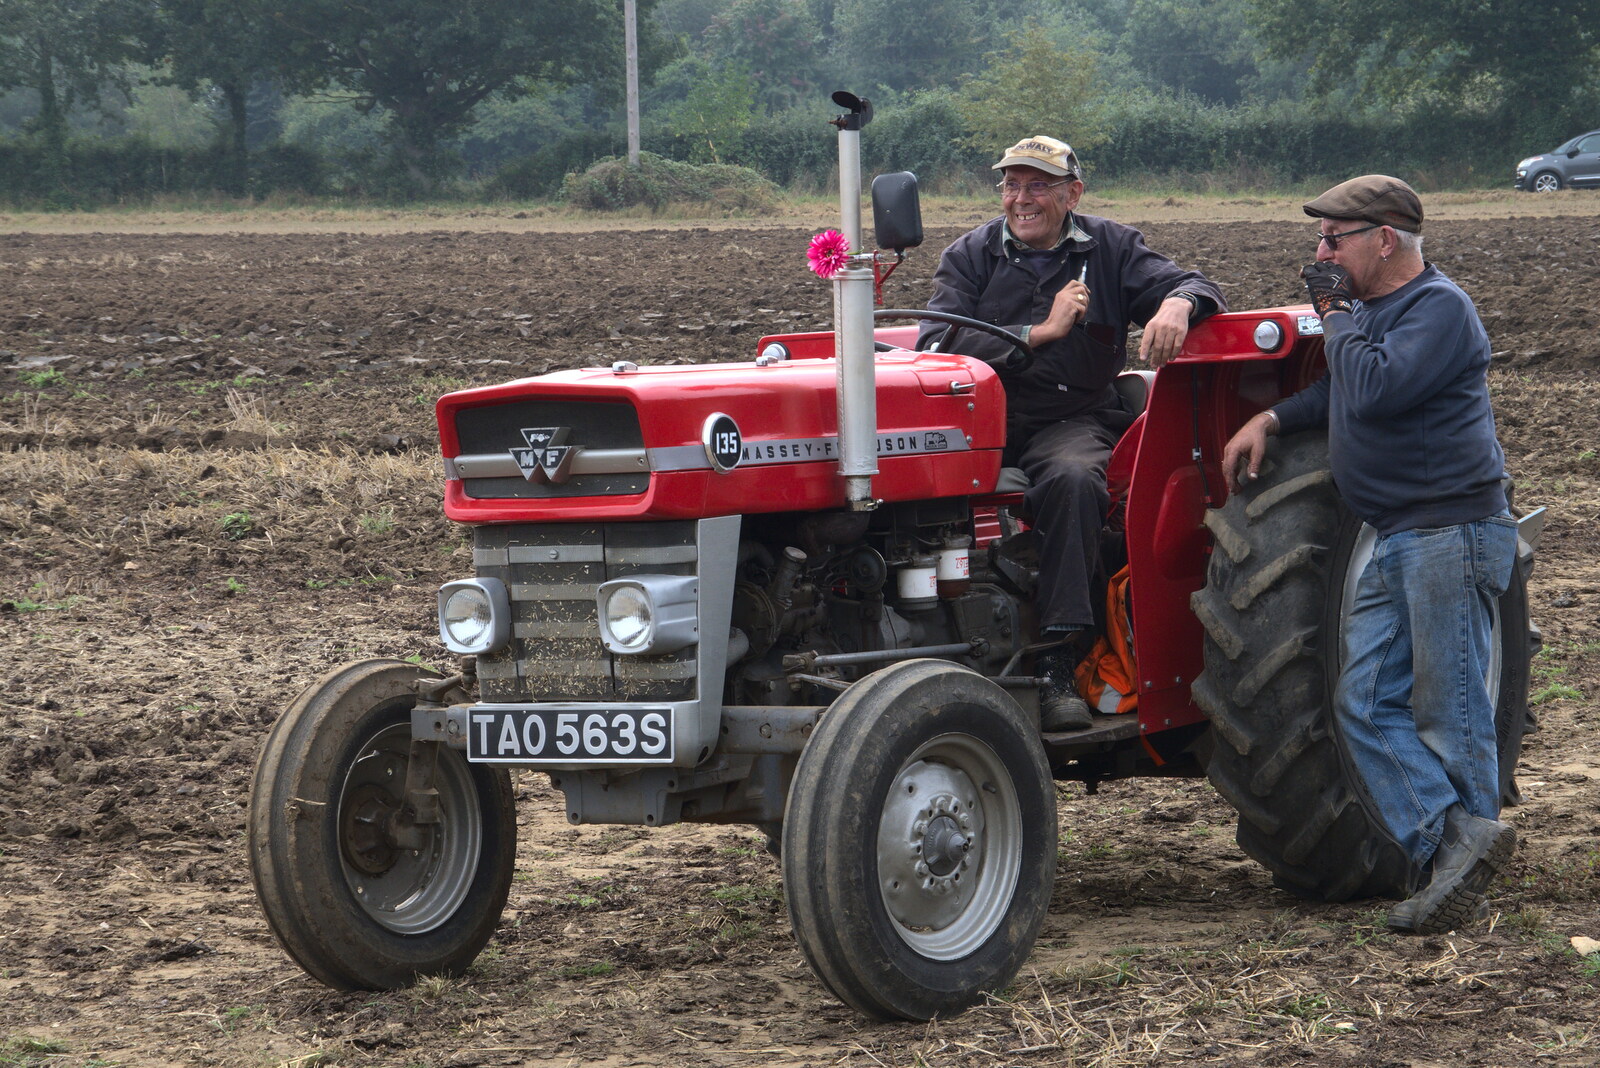 Vintage Tractor Ploughing, Thrandeston, Suffolk - 26th September 2021: More mardling over a Massey 135